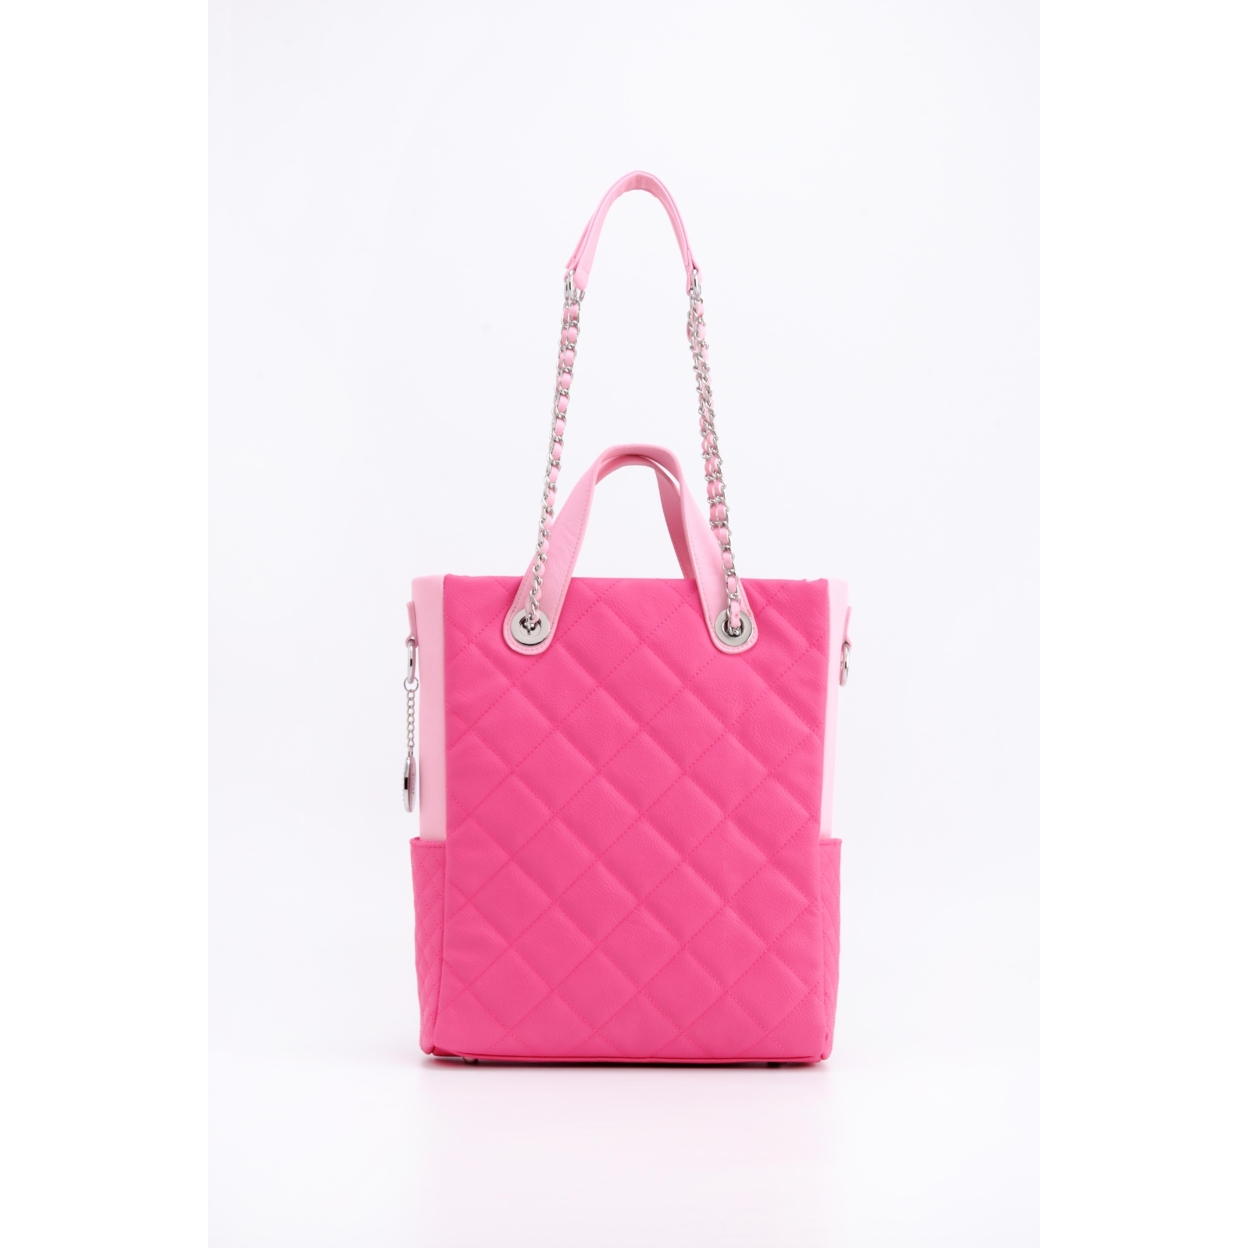 SCORE!'s Kat Travel Tote For Business, Work, Or School Quilted Shoulder Bag- Hot Pink And Light Pink